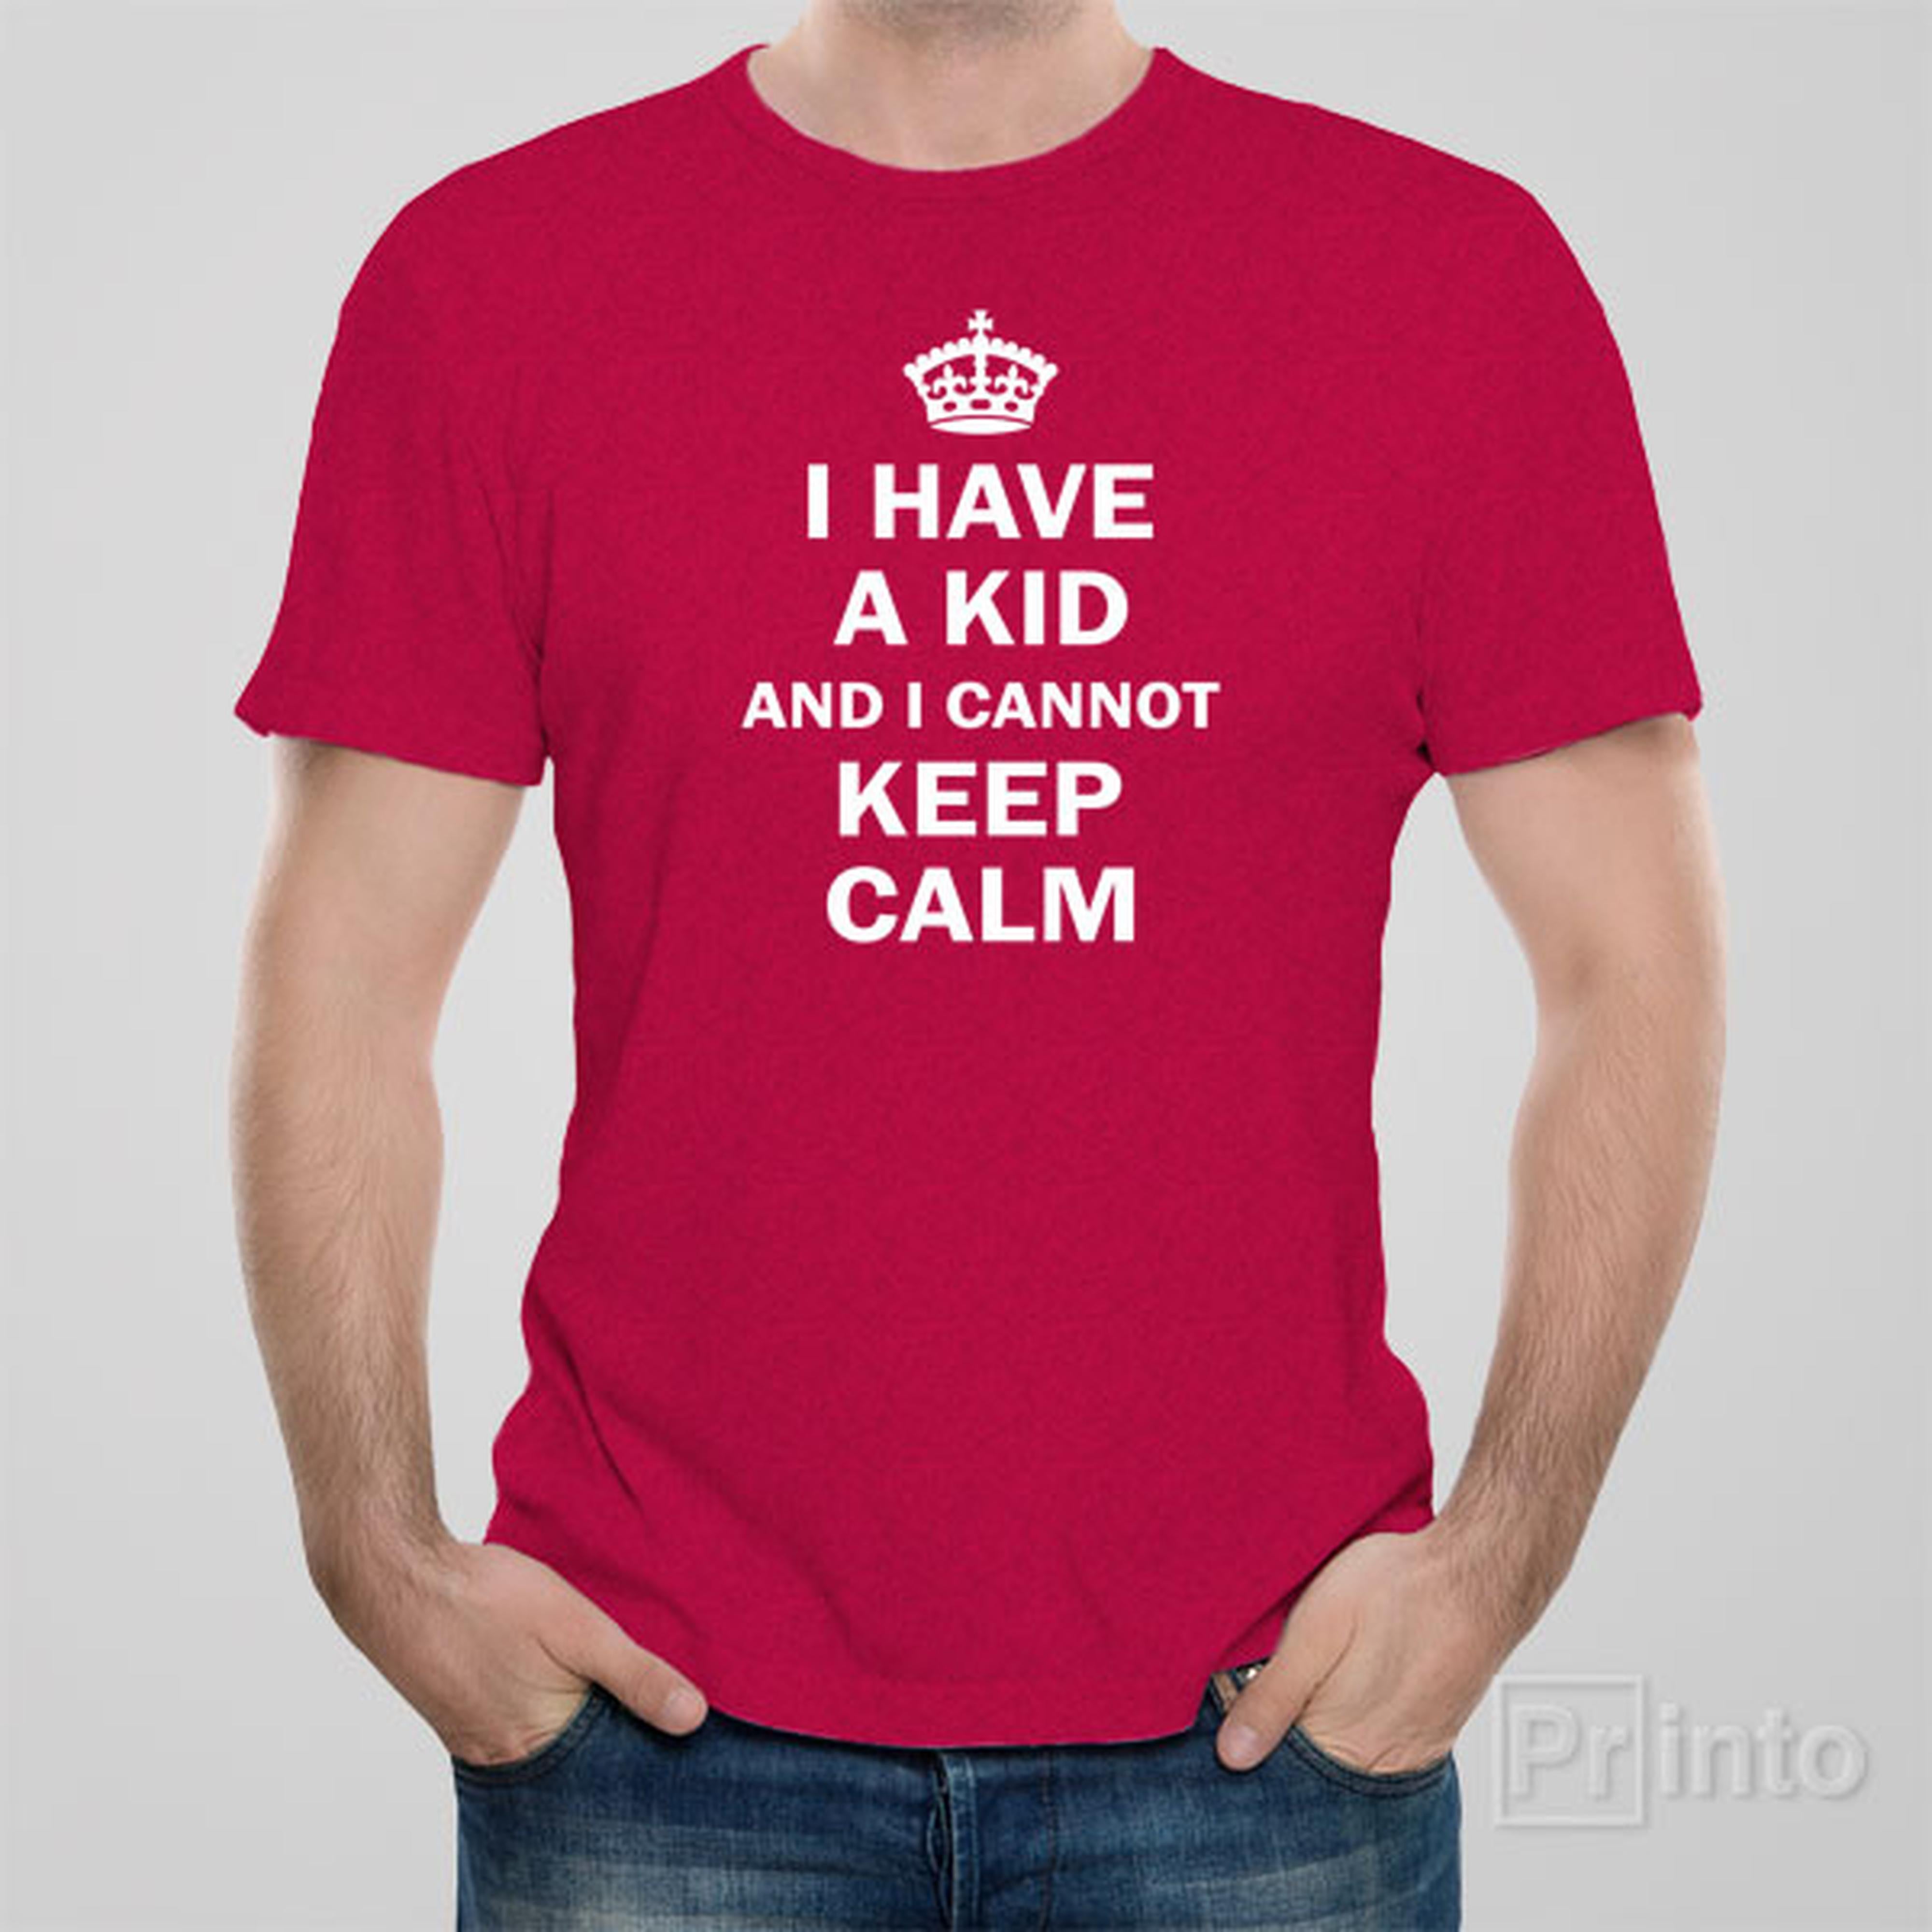 i-have-a-kid-and-i-cannot-keep-calm-t-shirt